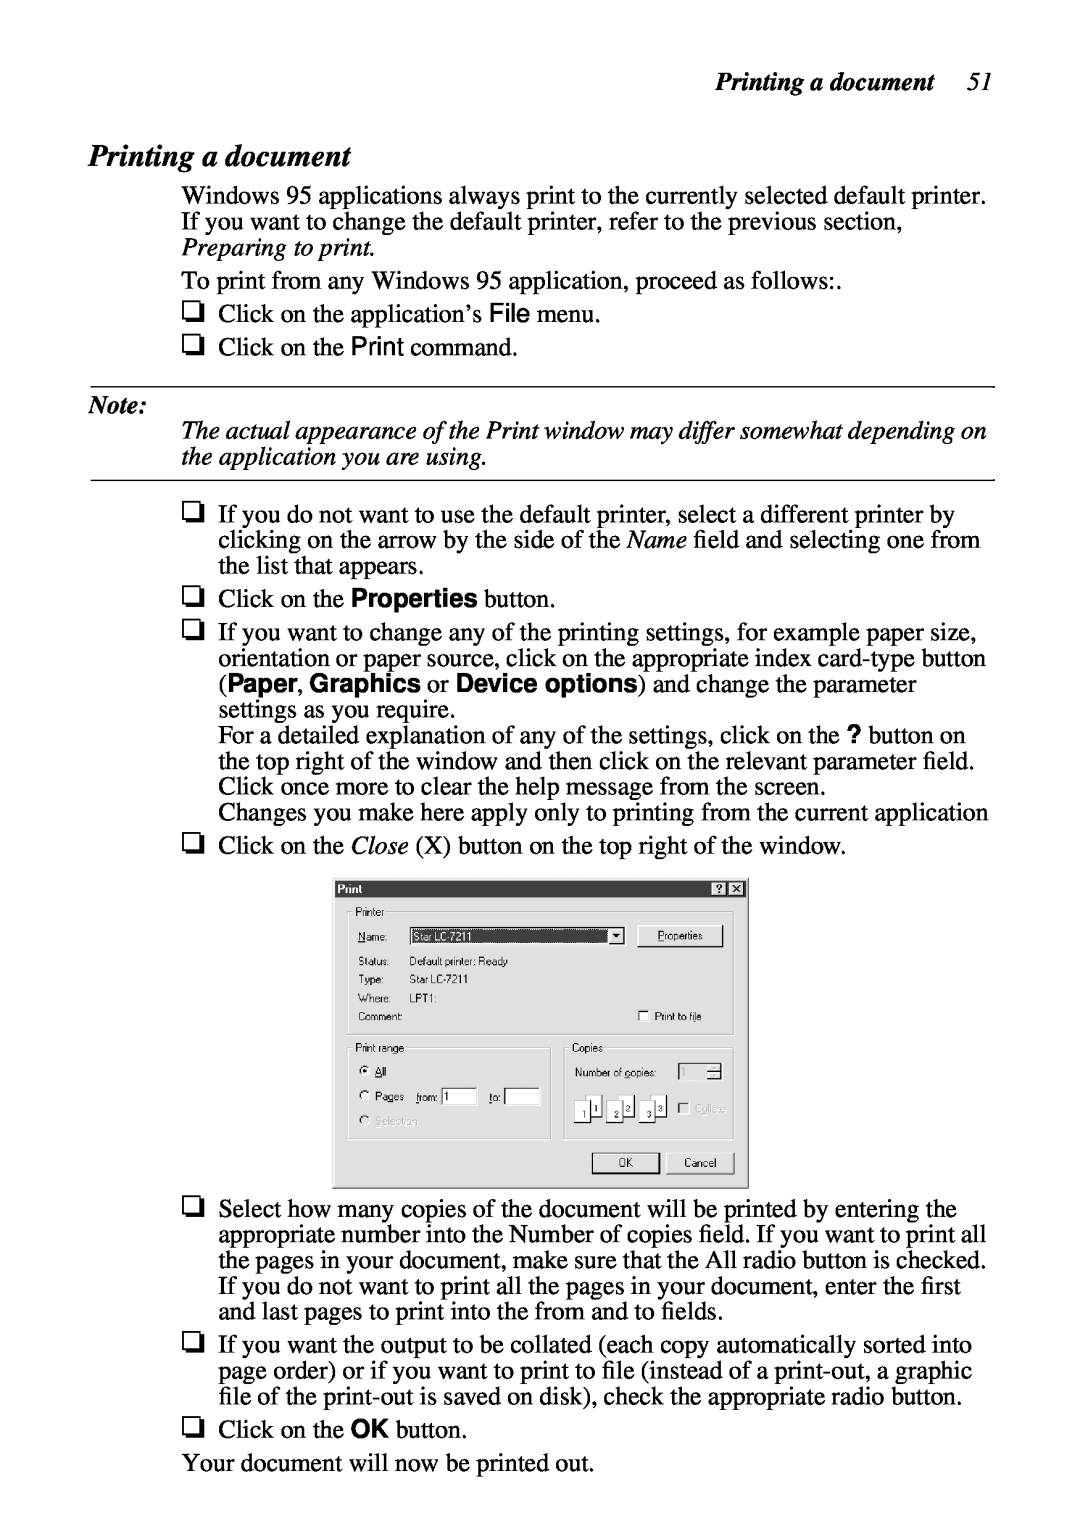 Star Micronics LC-7211 user manual Printing a document, To print from any Windows 95 application, proceed as follows 